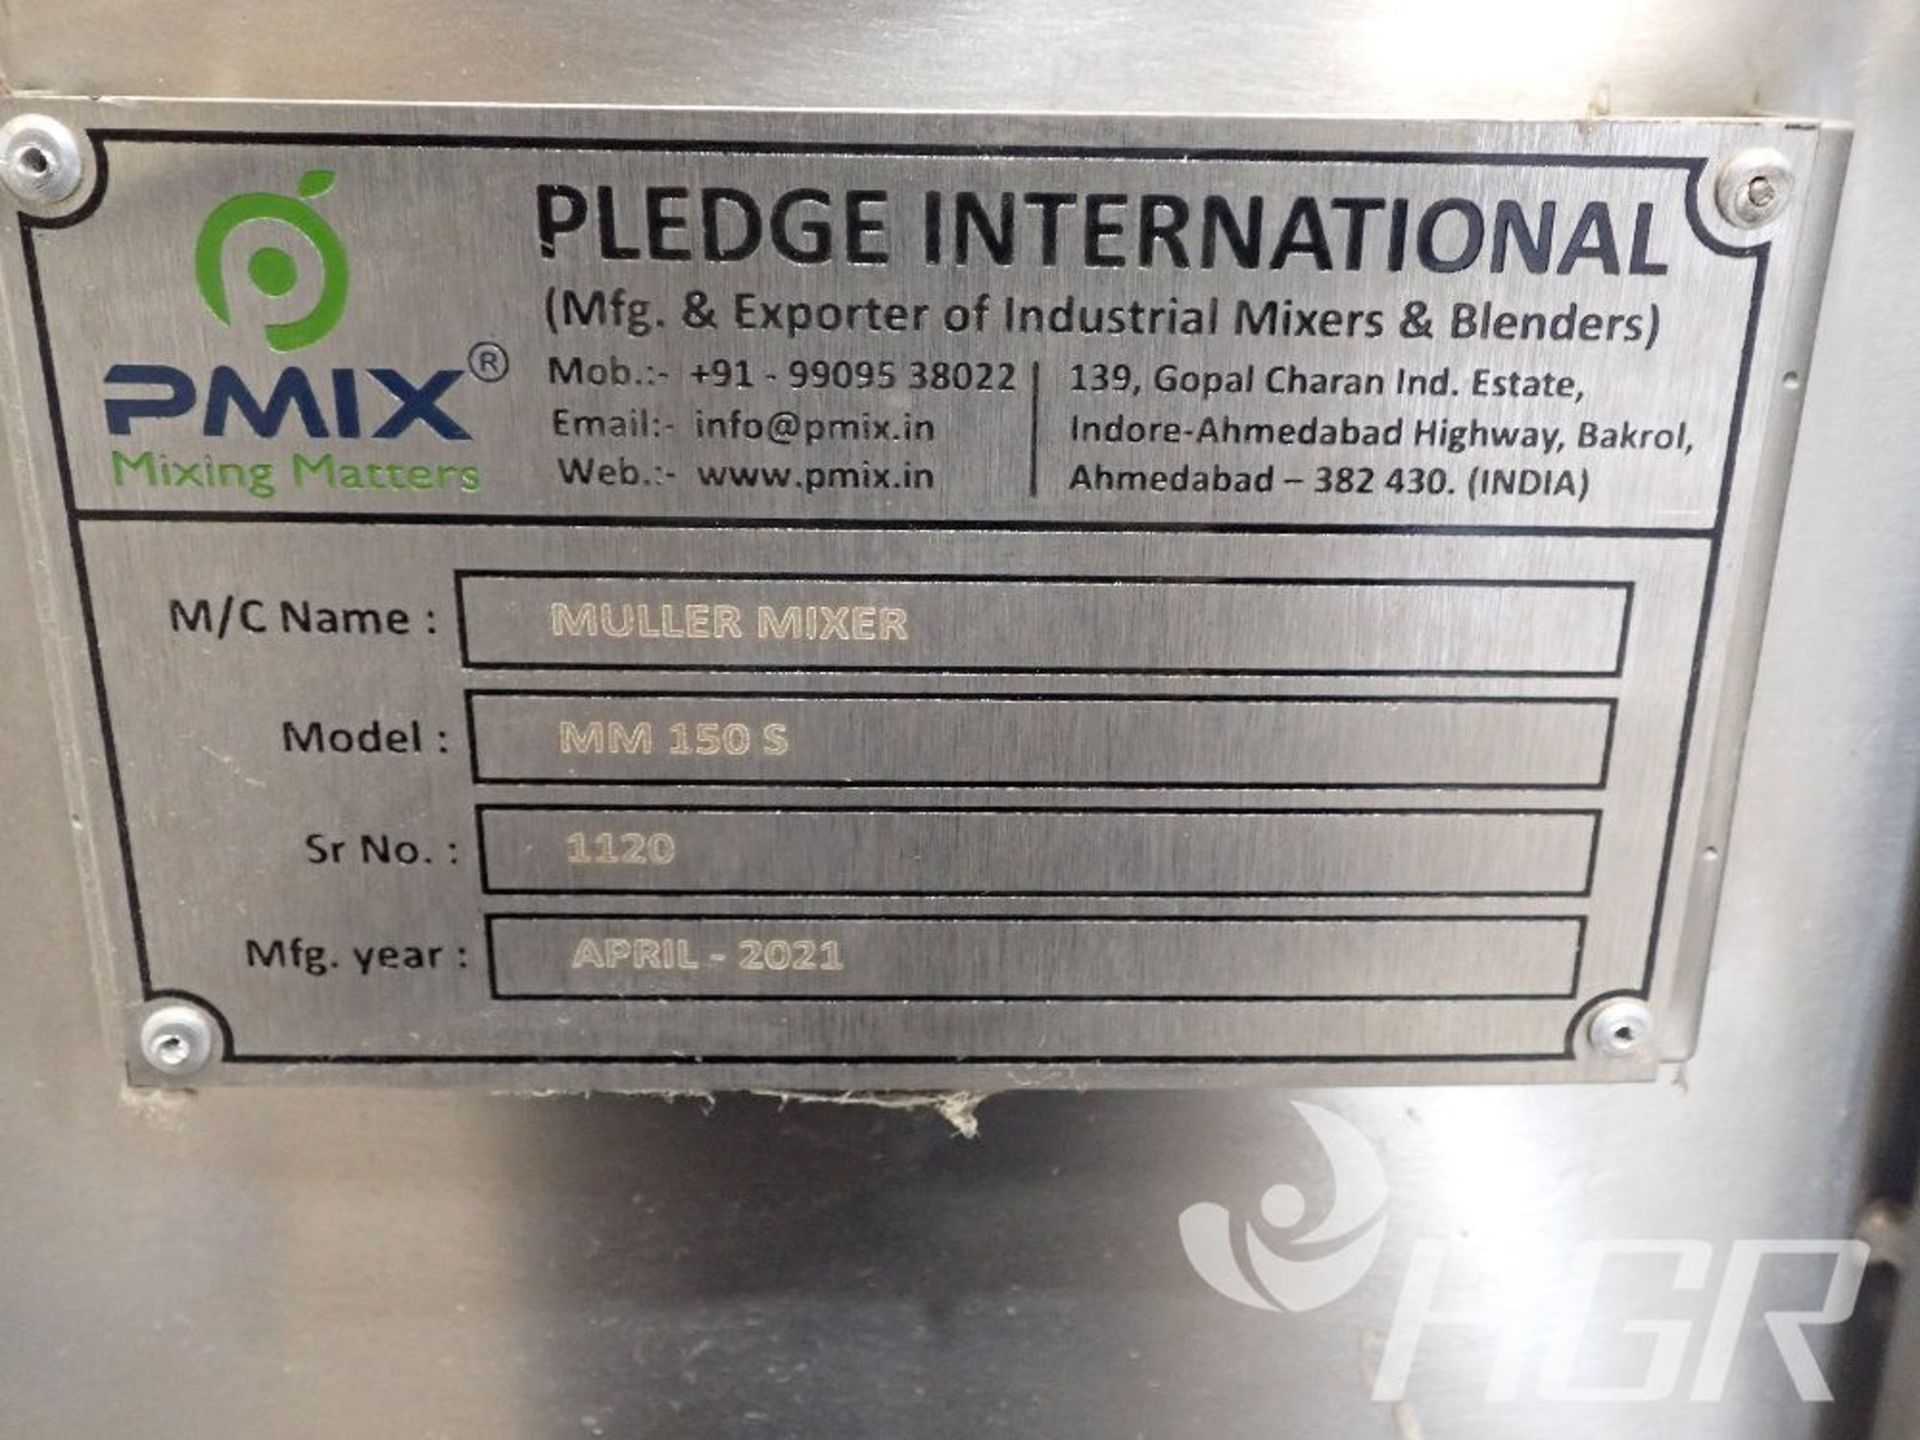 PLEDGE INTERNATIONAL MULLER MIXER, Model MM 150 S, Date: 2021; s/n 1120, Approx. Capacity: 60X60X19, - Image 3 of 18